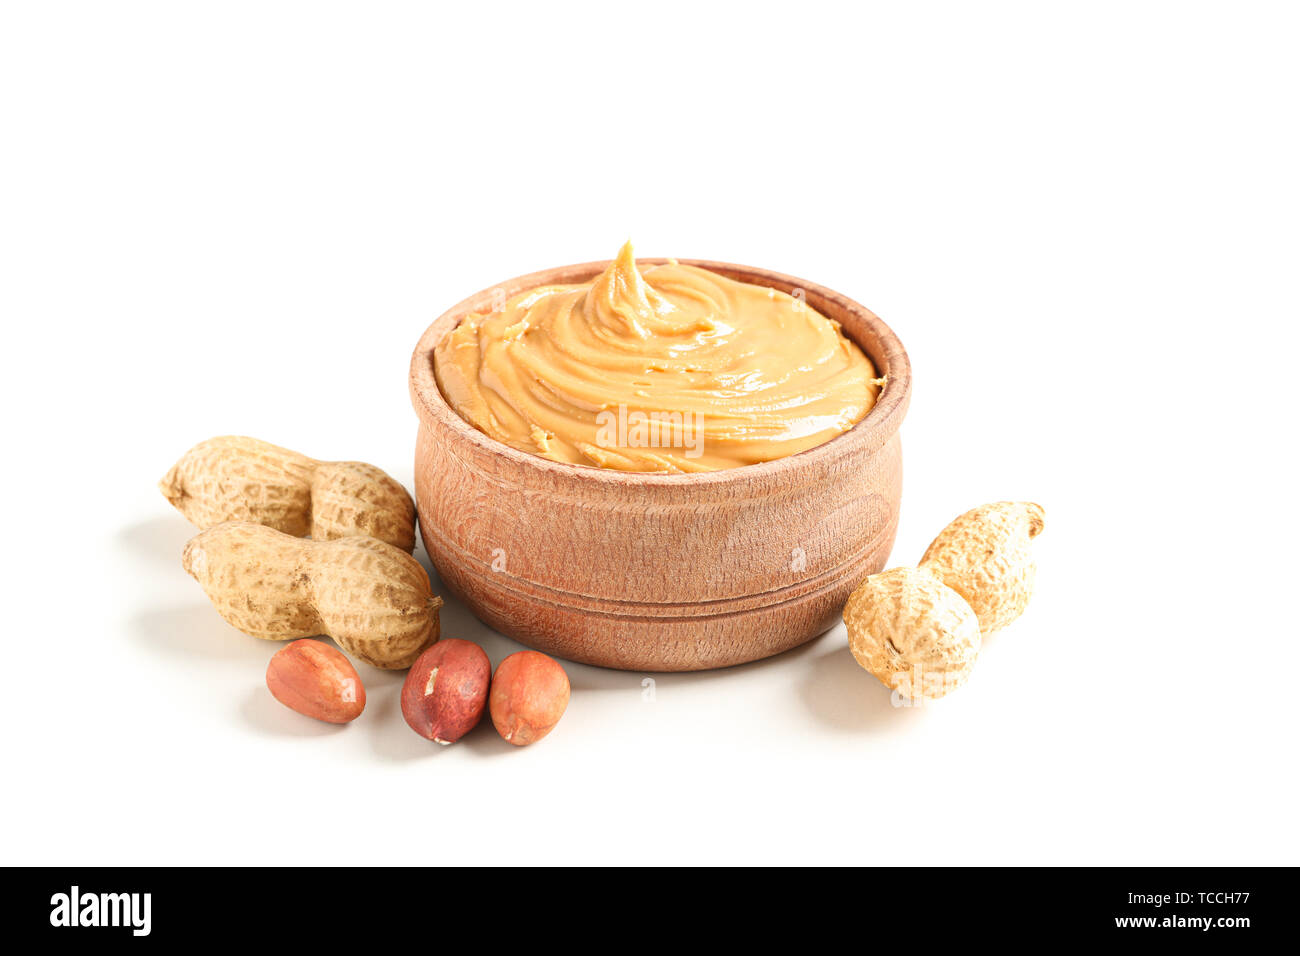 https://c8.alamy.com/comp/TCCH77/creamy-peanut-butter-in-glass-bowl-and-peanut-isolated-on-white-background-a-traditional-product-of-american-cuisine-TCCH77.jpg